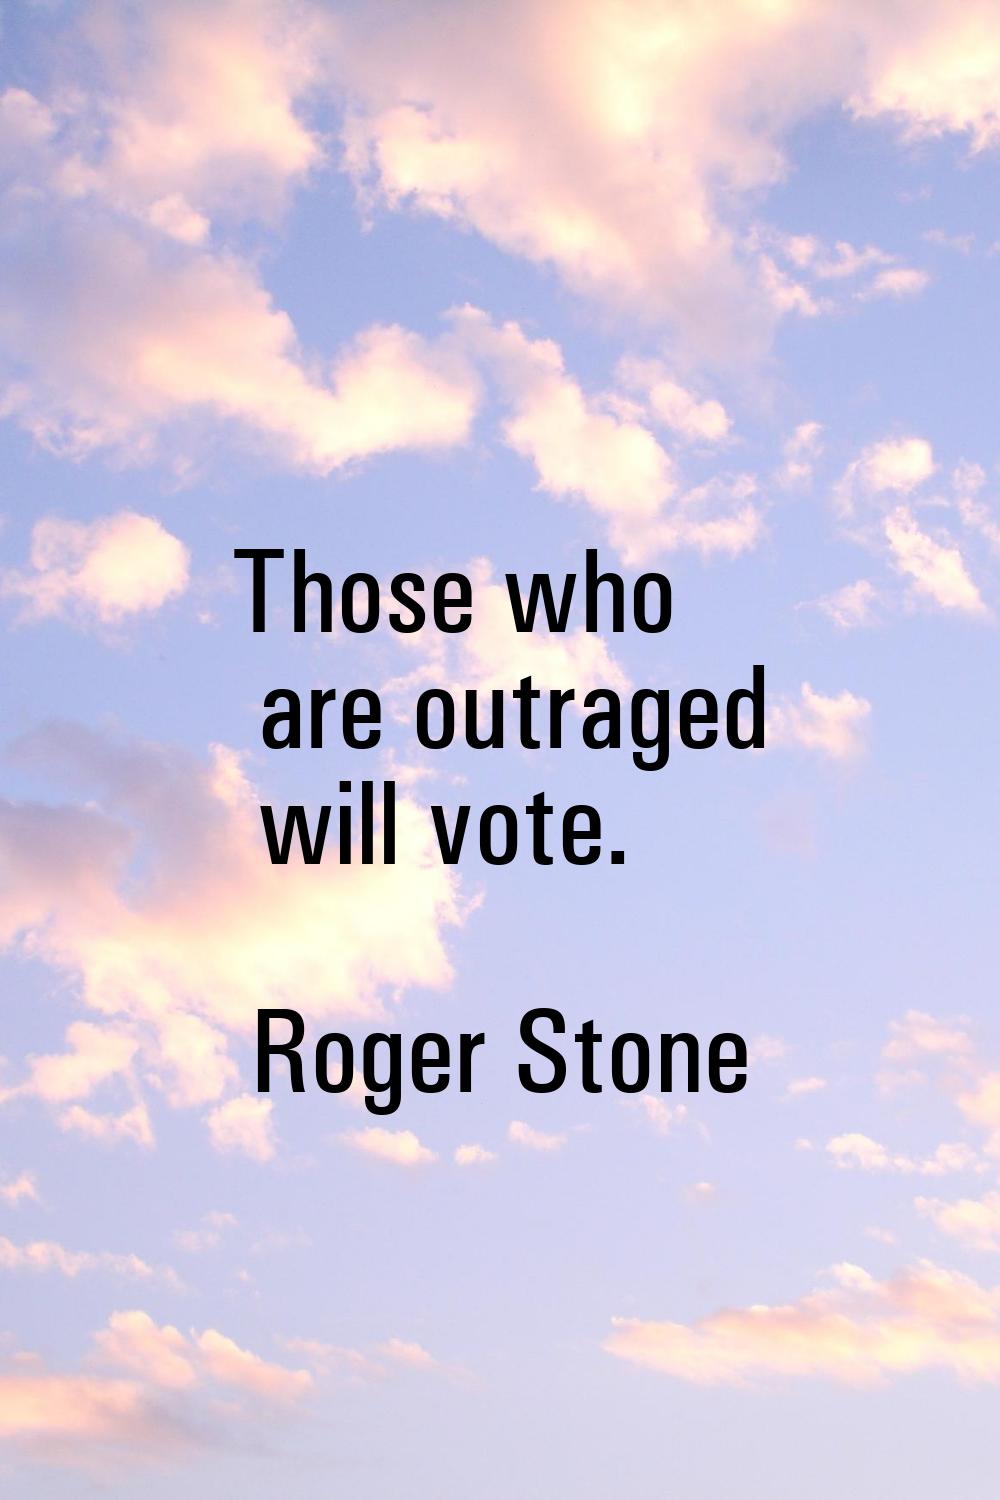 Those who are outraged will vote.